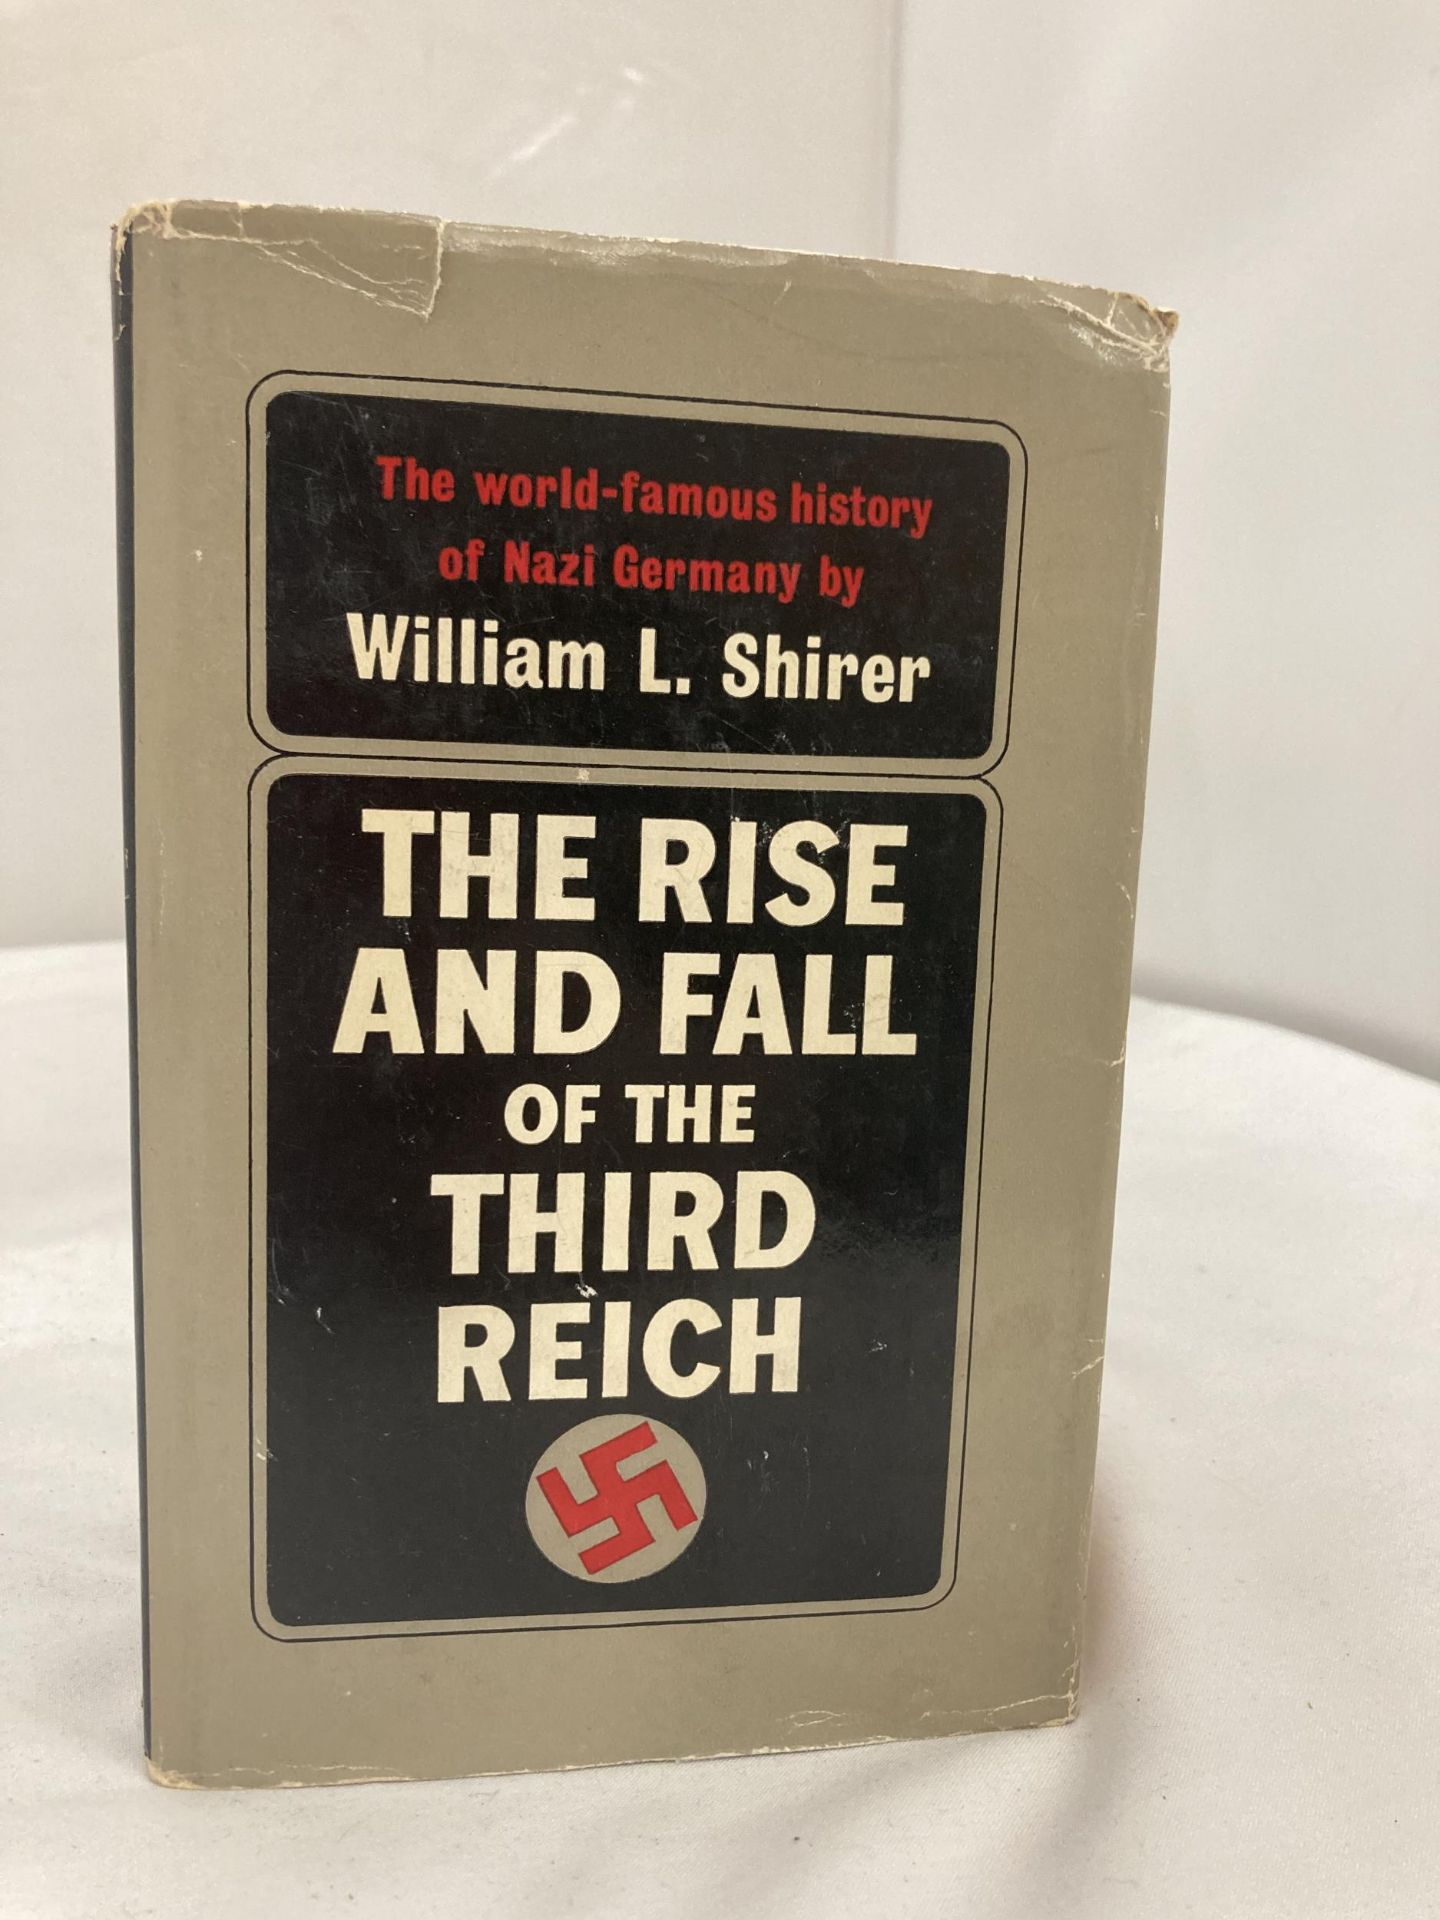 A COPY OF 'THE RISE AND FALL OF THE THIRD REICH', A HISTORY OF NAZI GERMANY BY WILLIAM L. SHIRER